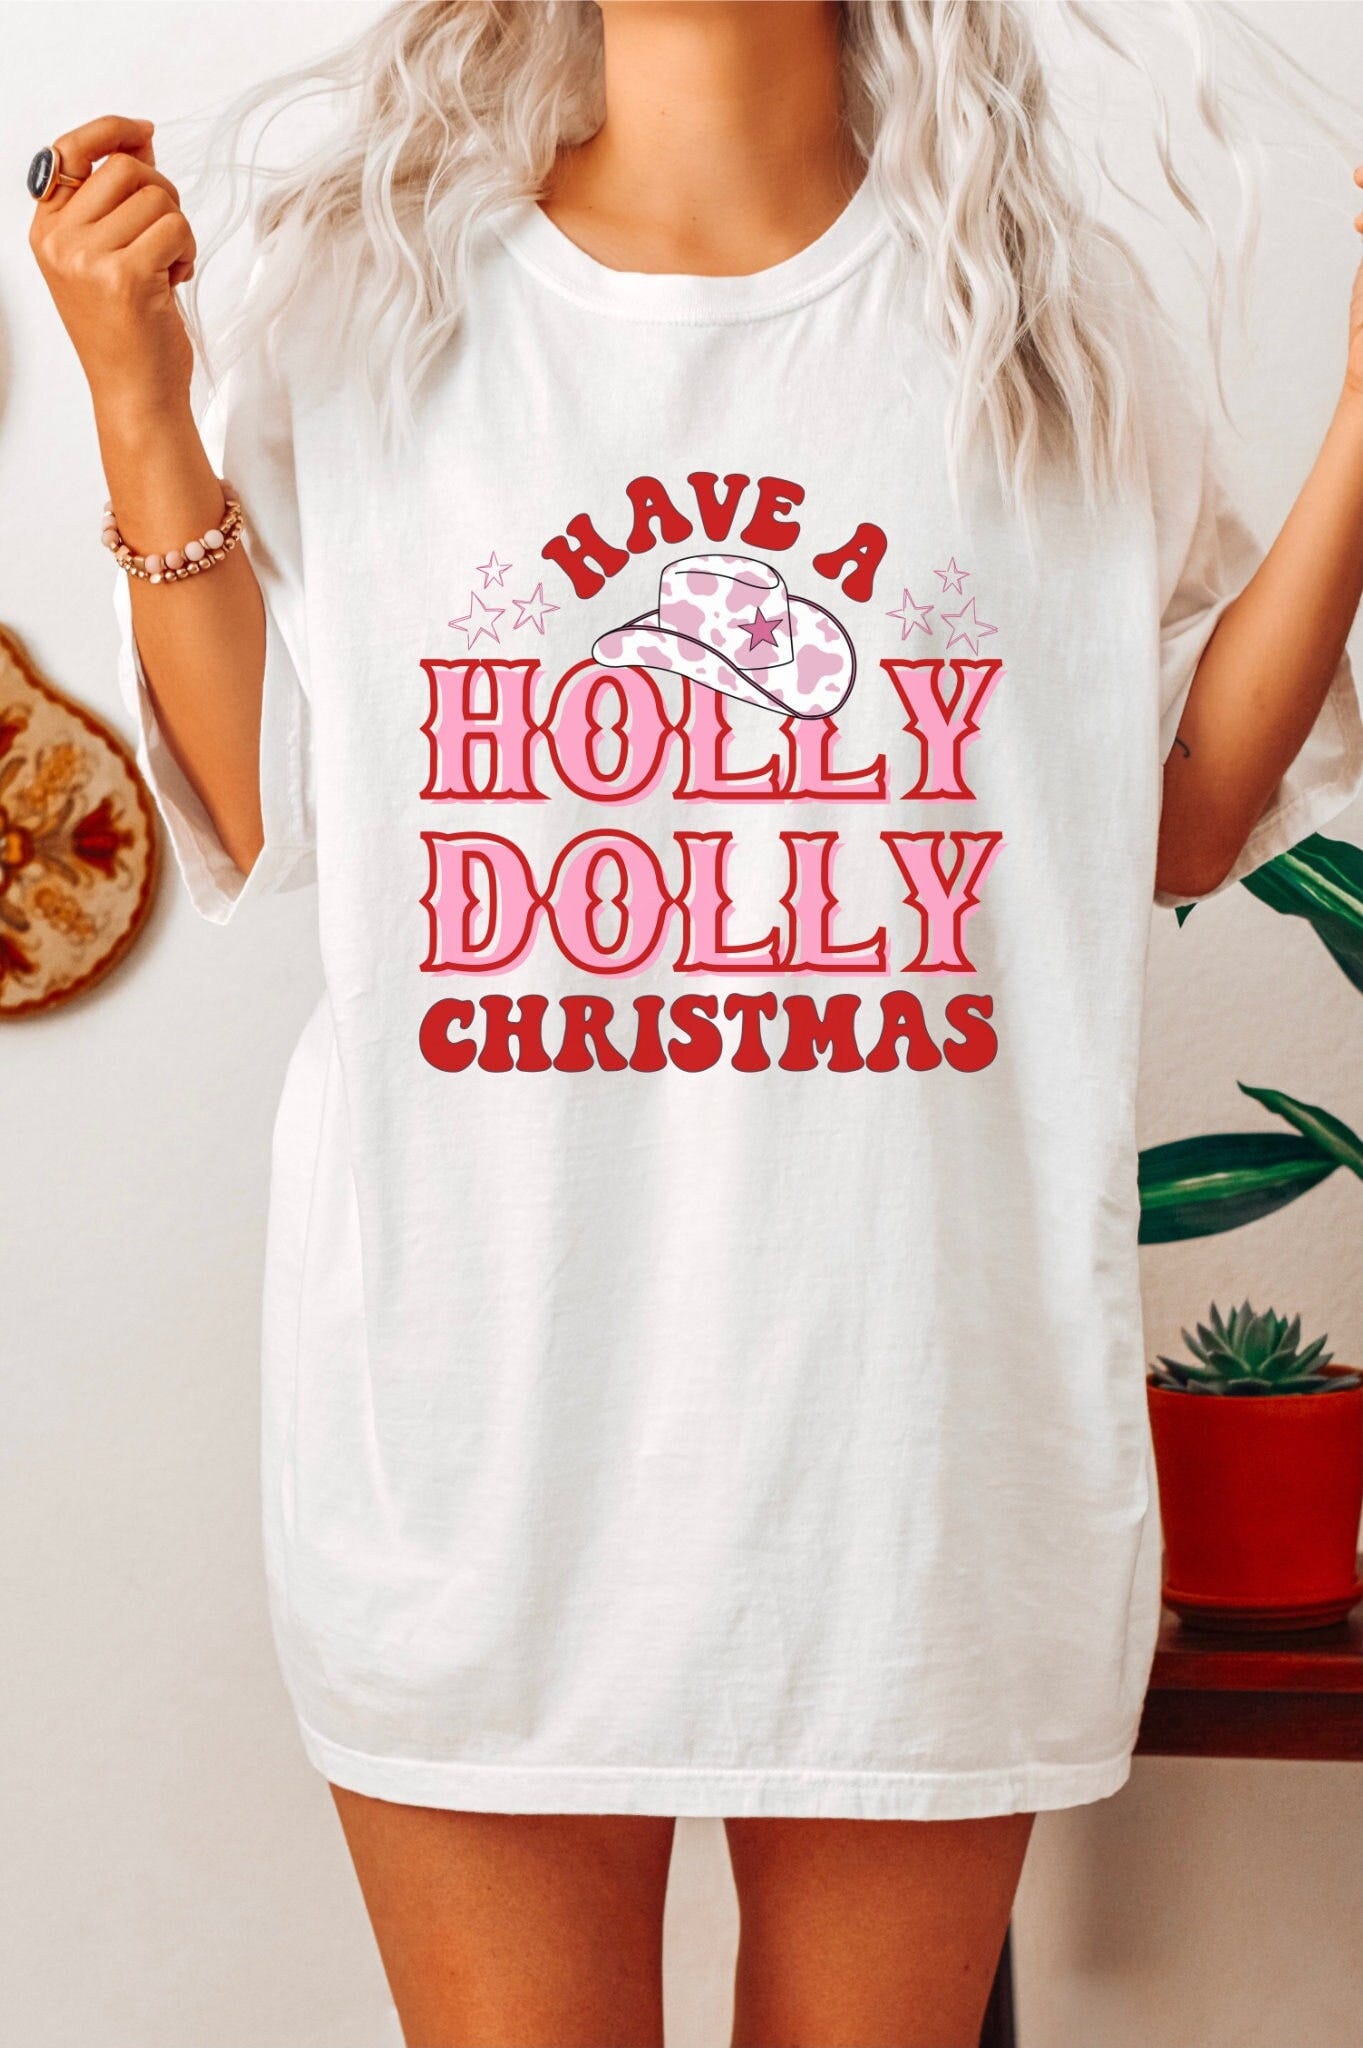 Holly Dolly Christmas Shirt, Western Christmas Tee, Cowgirl Christmas Shirt, Country Christmas Shirt, Best Friend Gift, Comfort Colors Tee